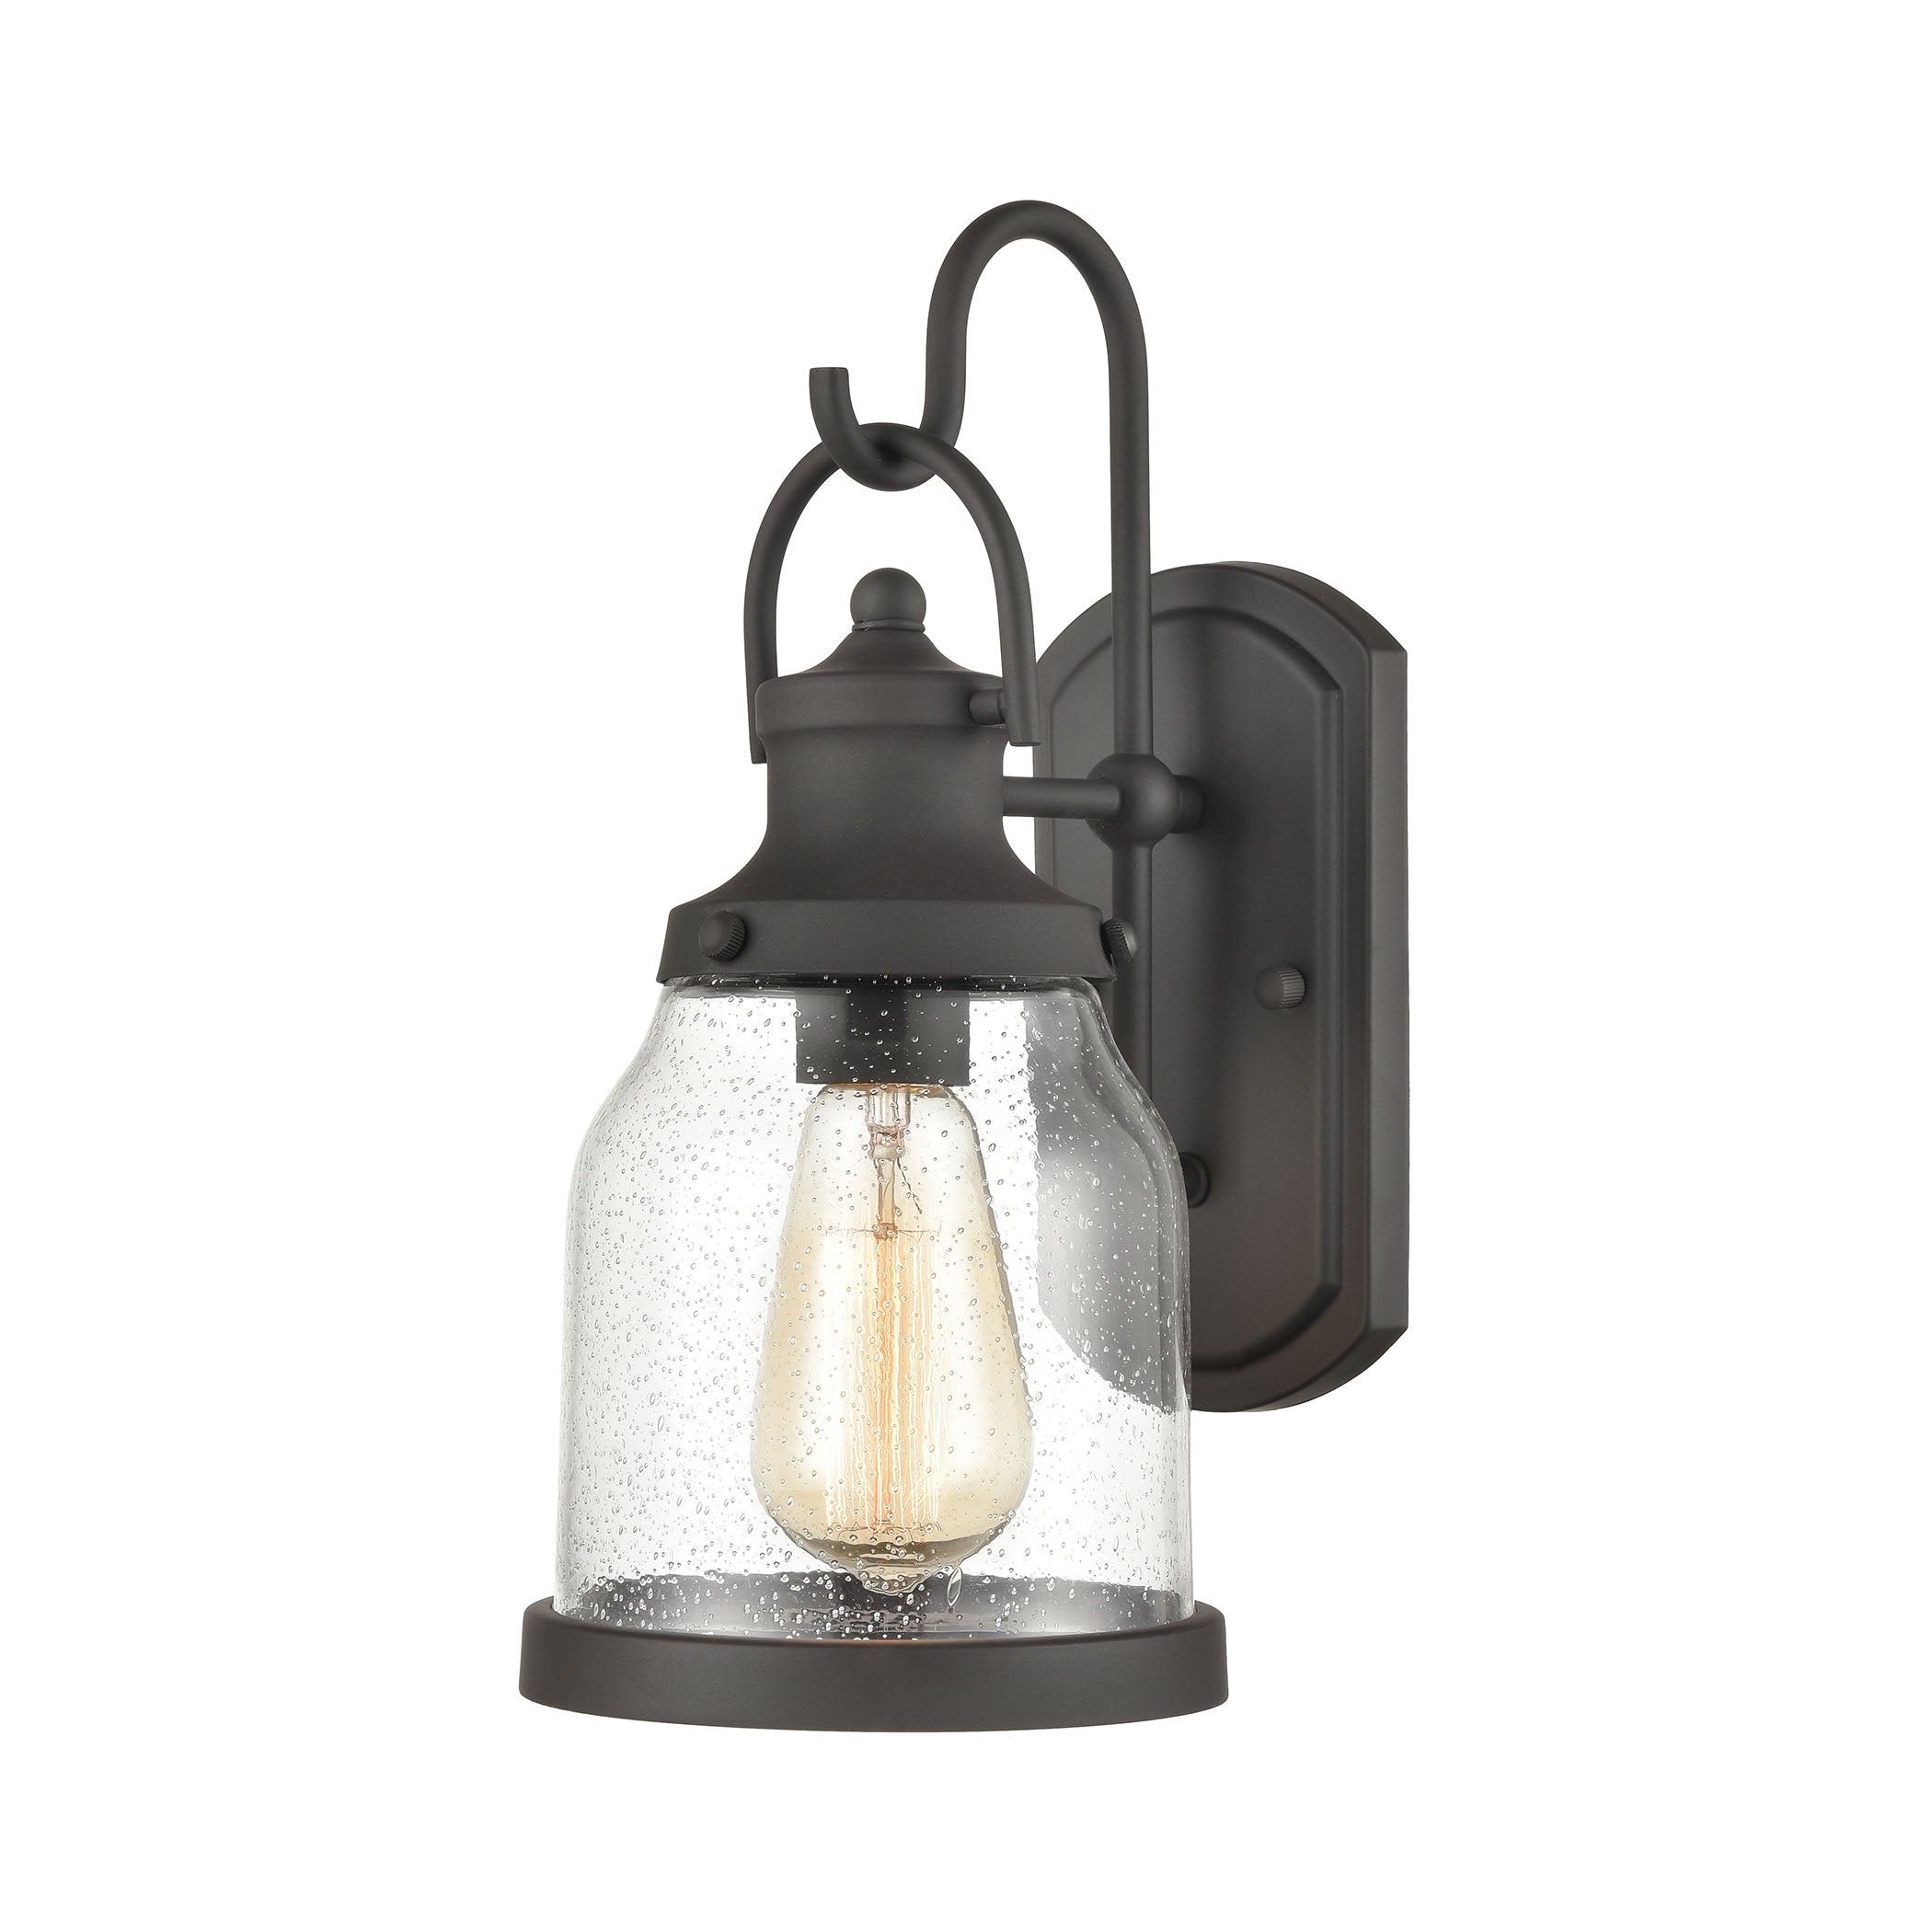 ELK Lighting 45420/1 Renford 1-Light Outdoor Sconce in Architectural Bronze with Seedy Glass